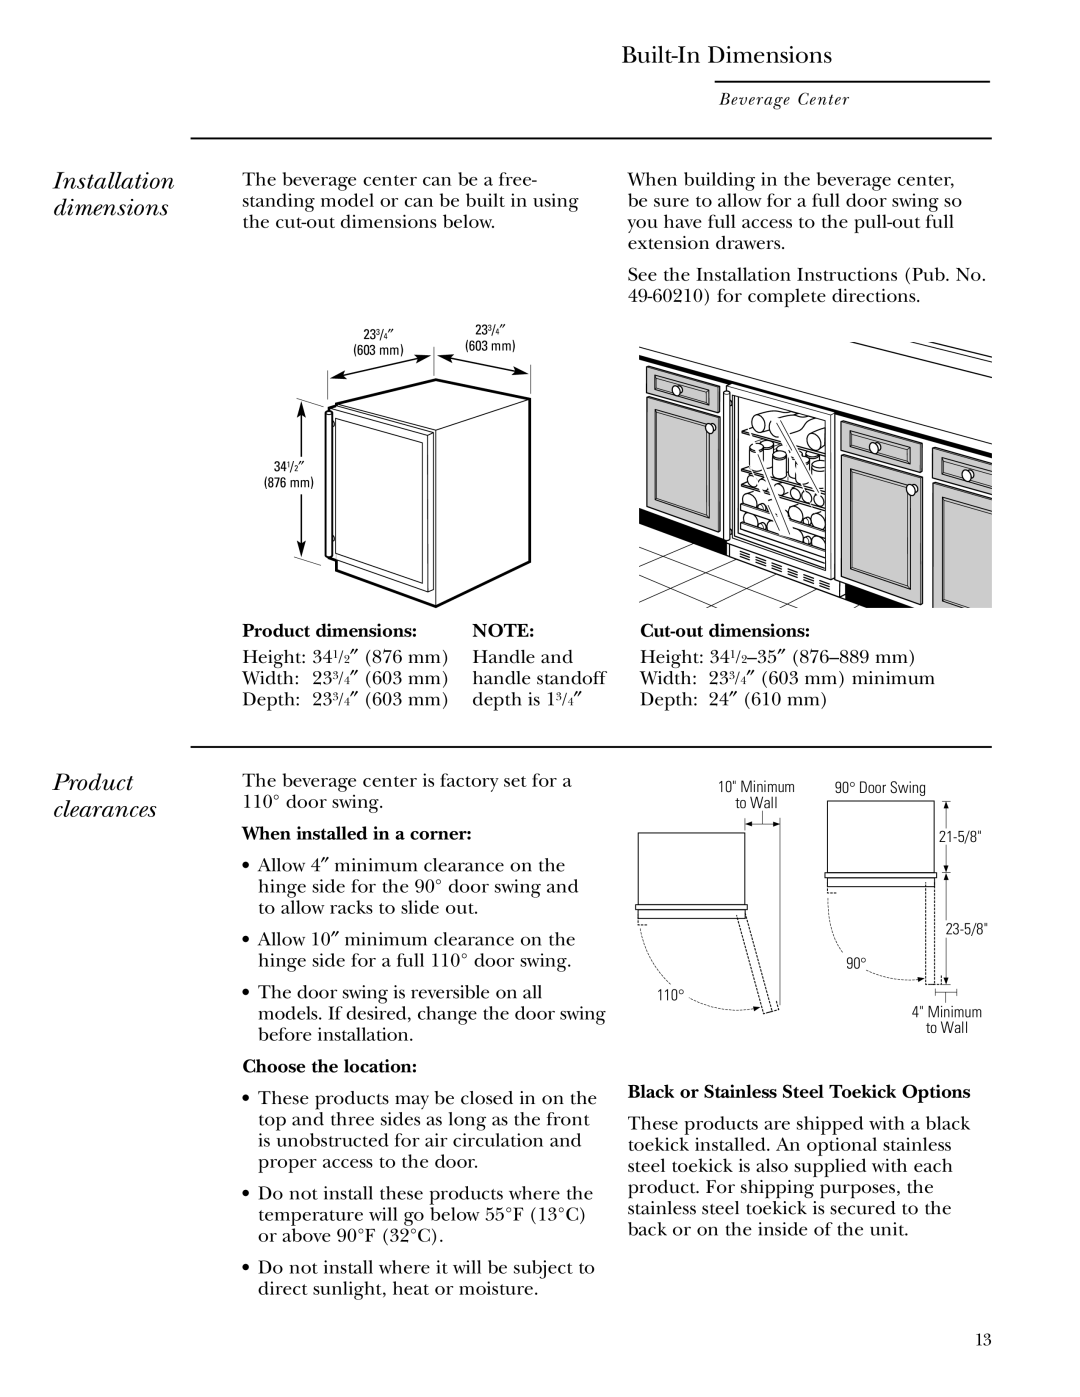 GE Monogram ZDBT210 owner manual Built-In Dimensions, Installation dimensions, Product clearances, Product dimensions 